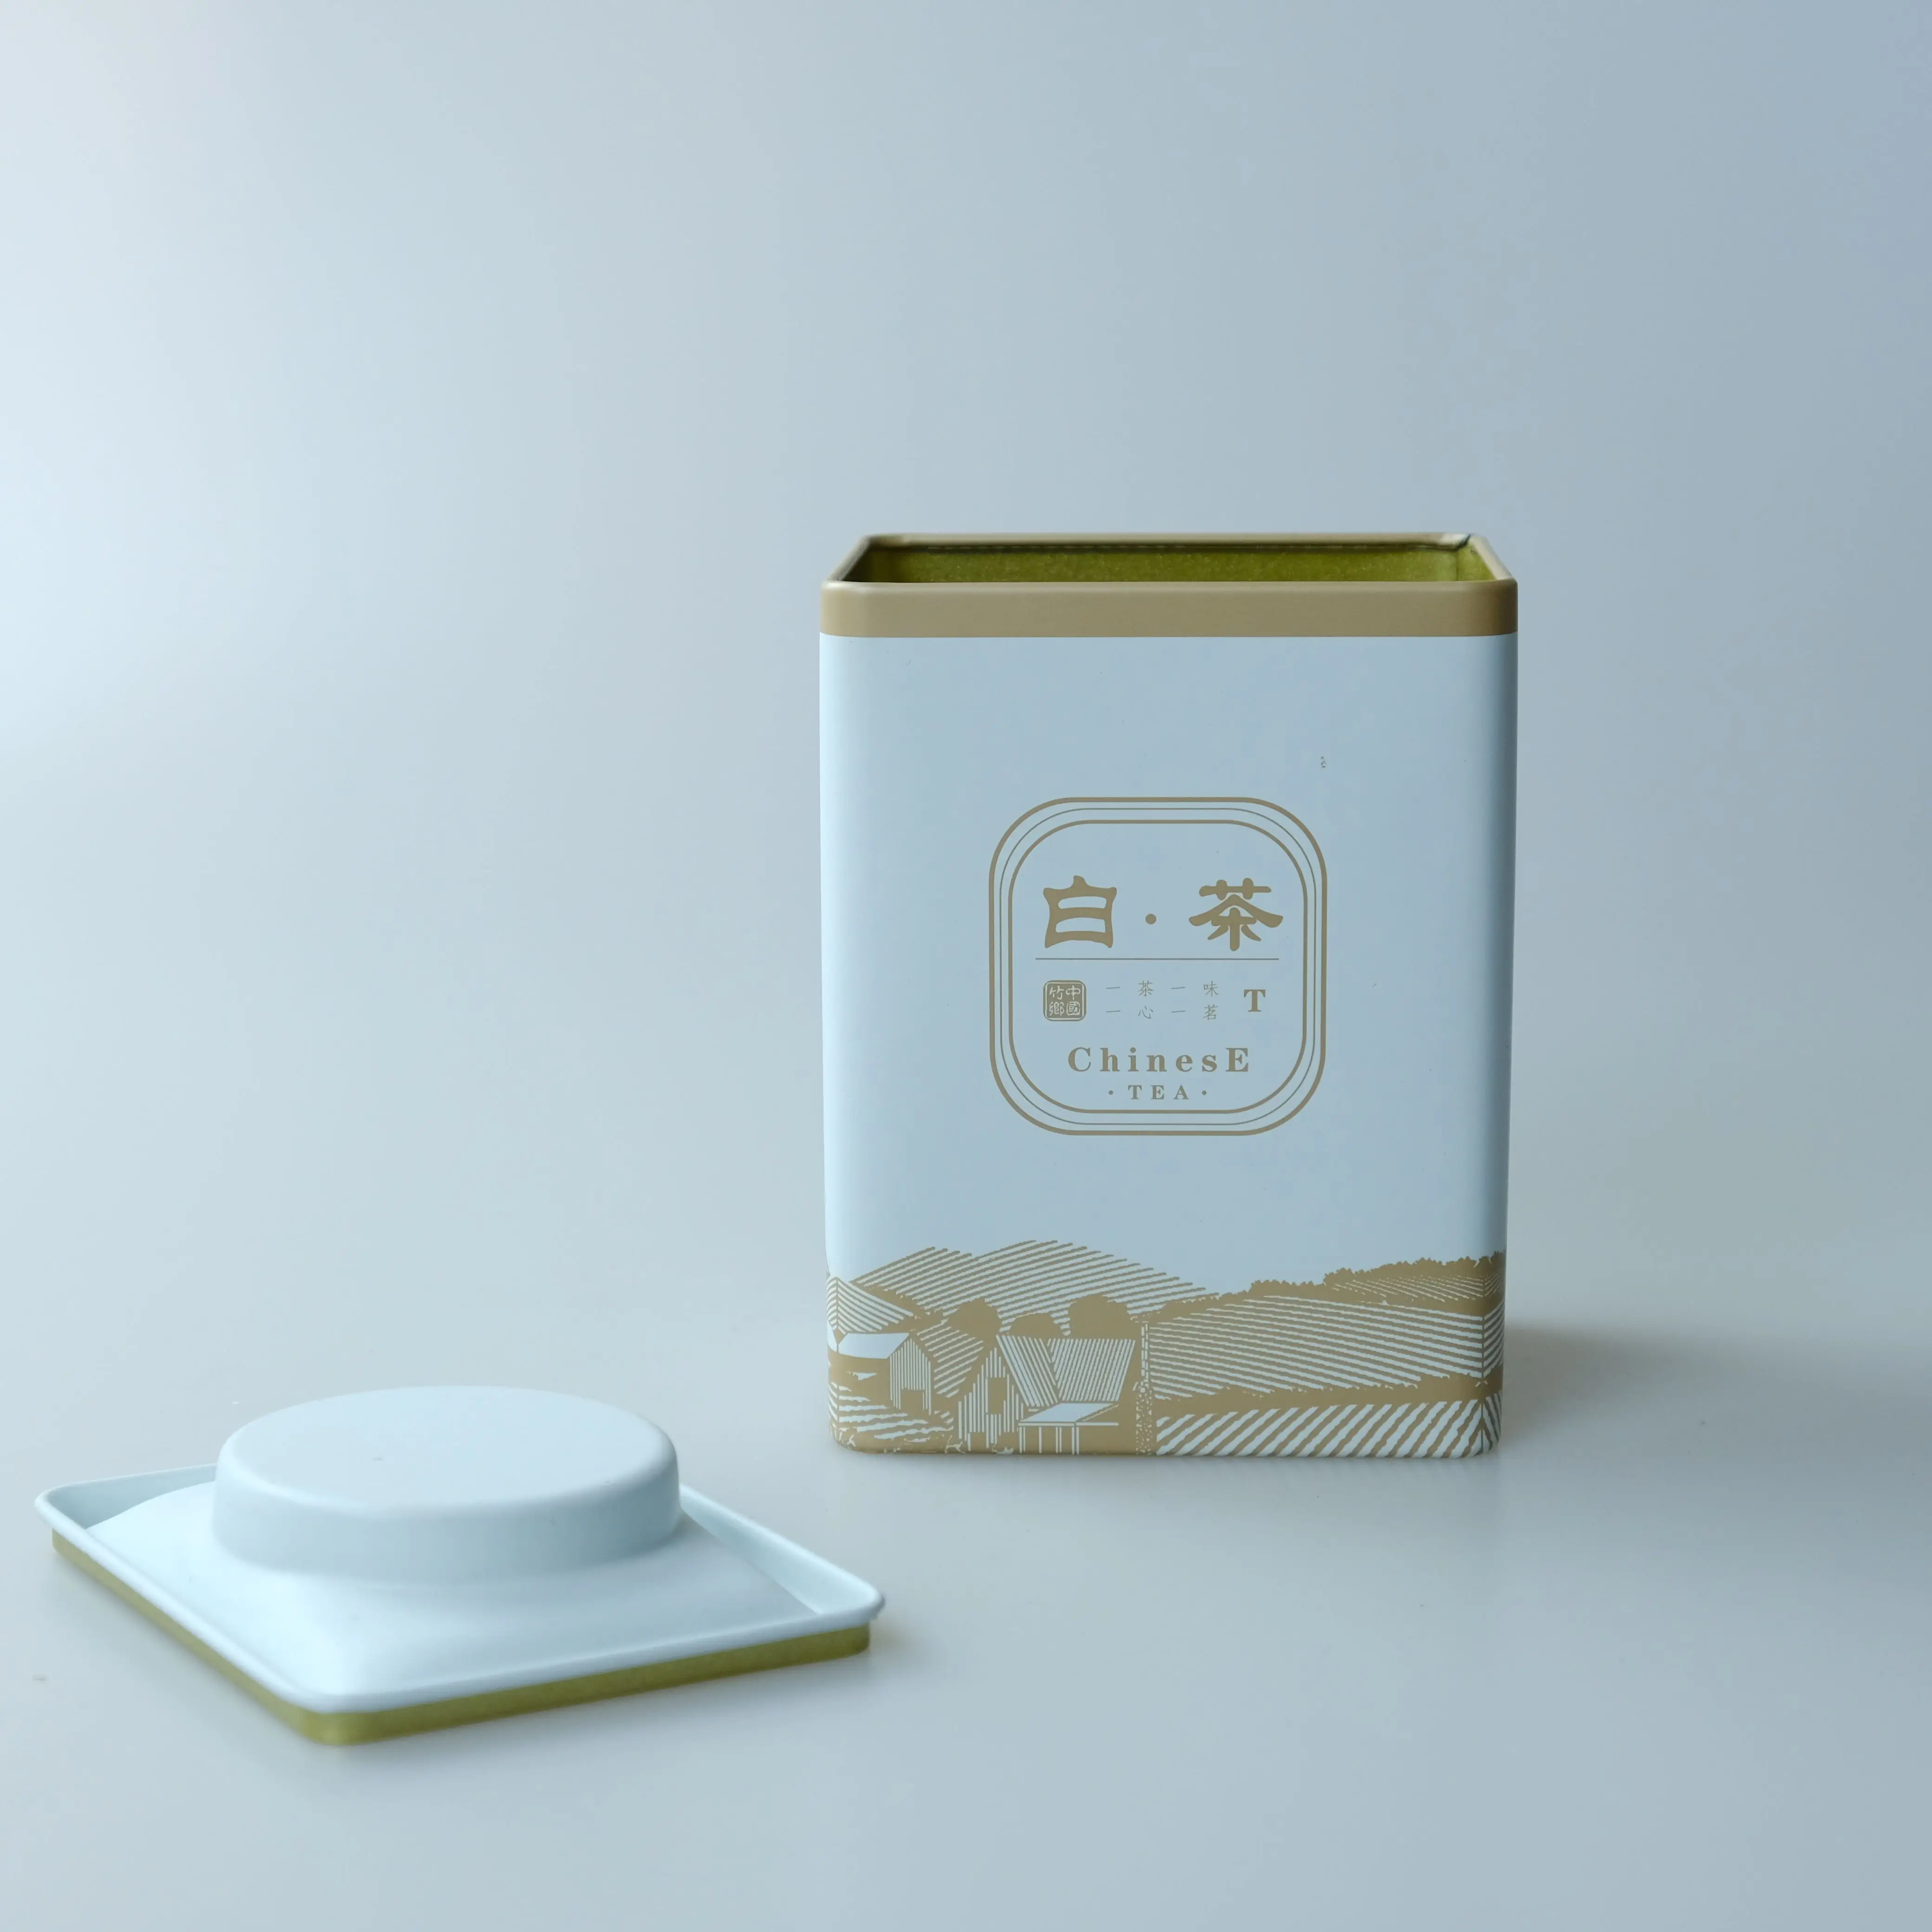 
Customized supply of metal containers, various types of beautifully designed tea boxes 